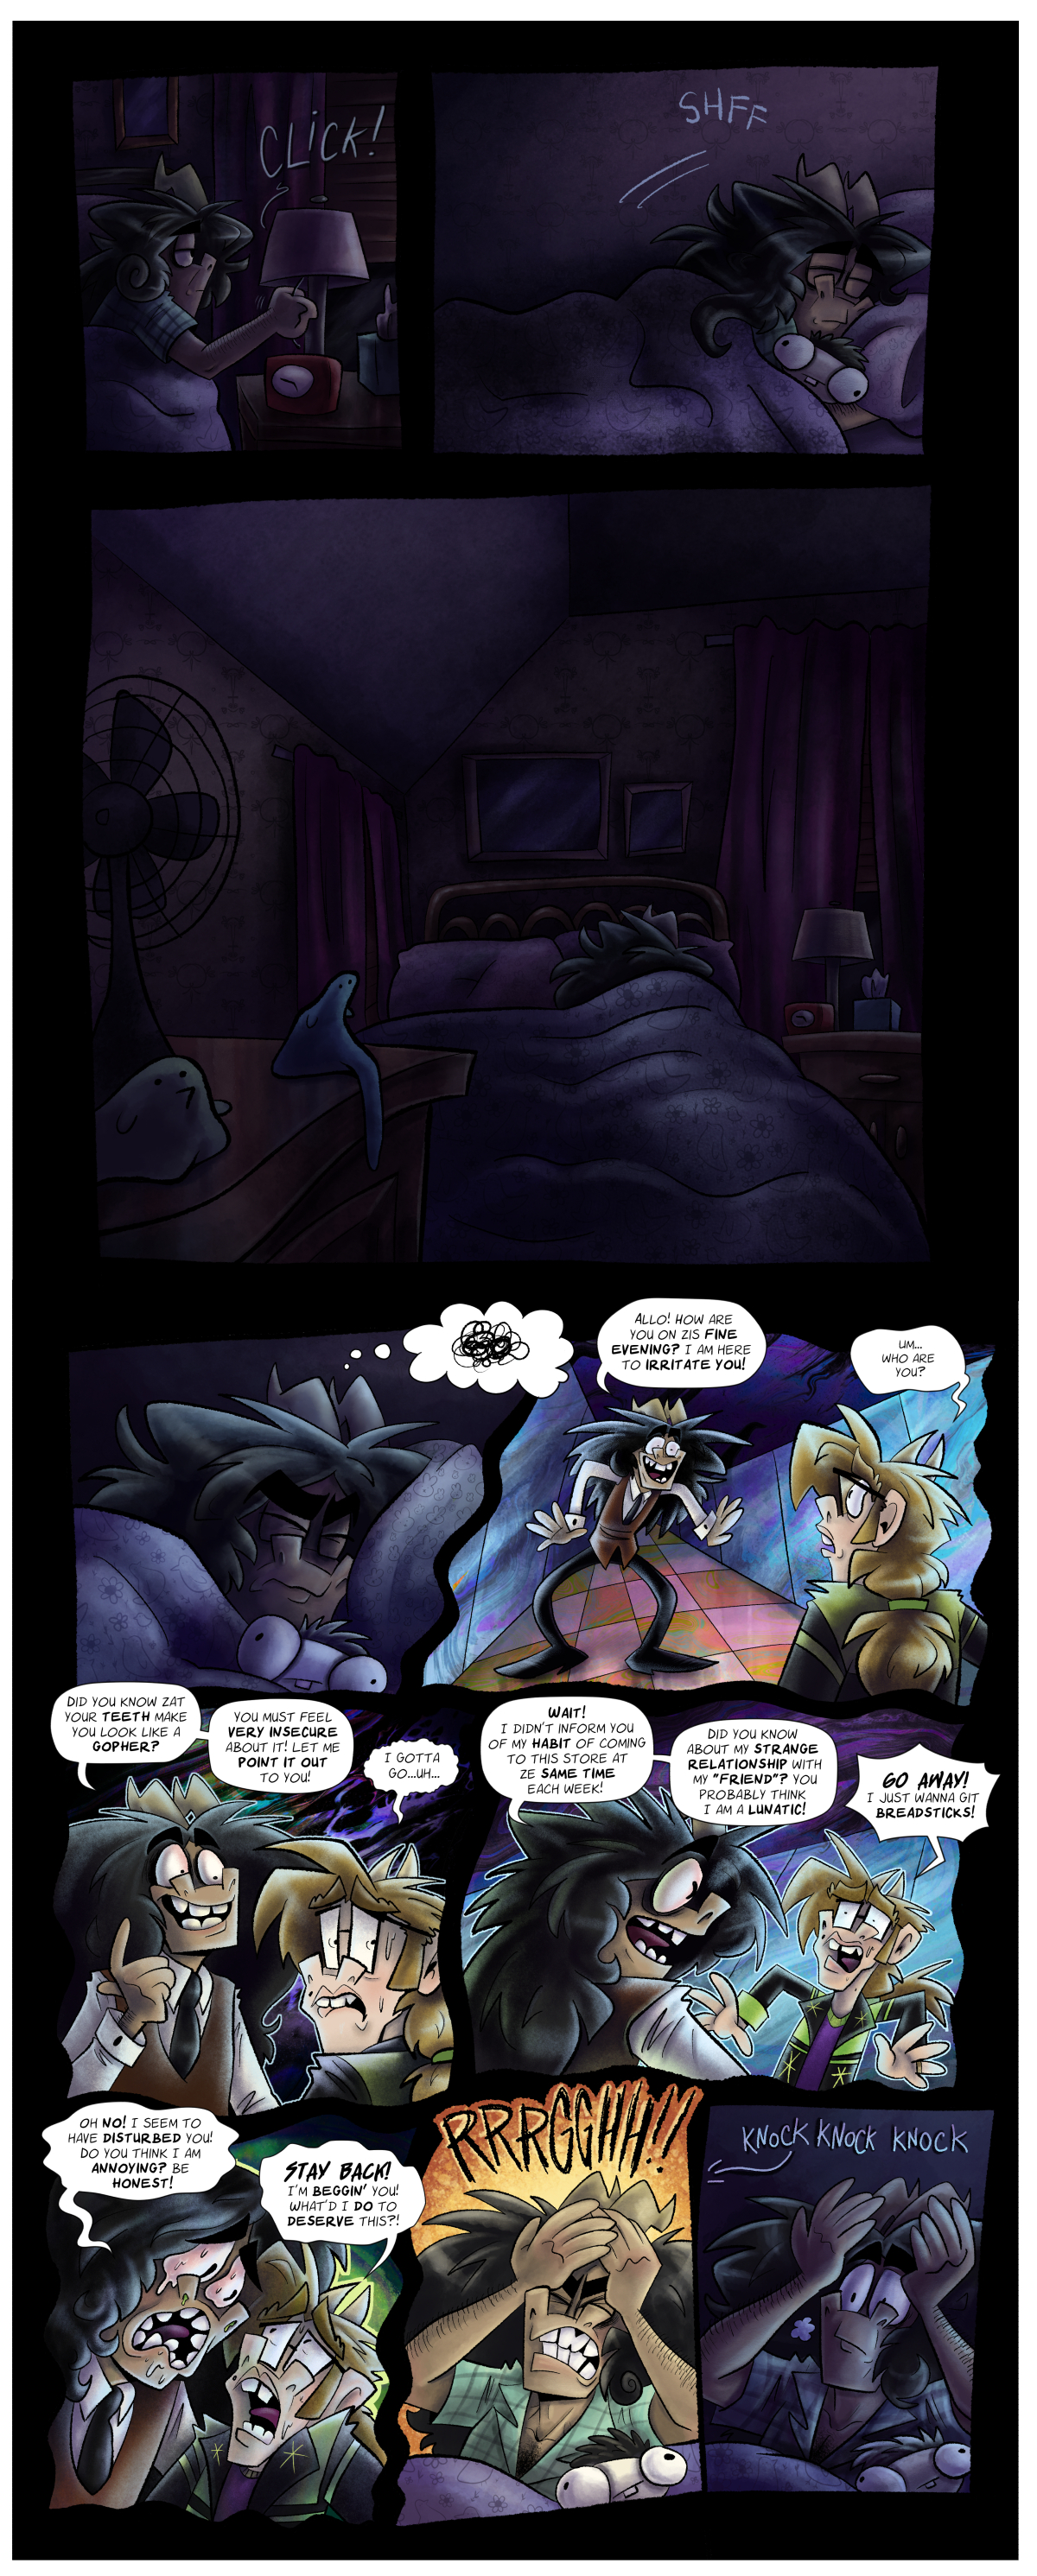 Ch 2 pages 28 and 29: Insomnia